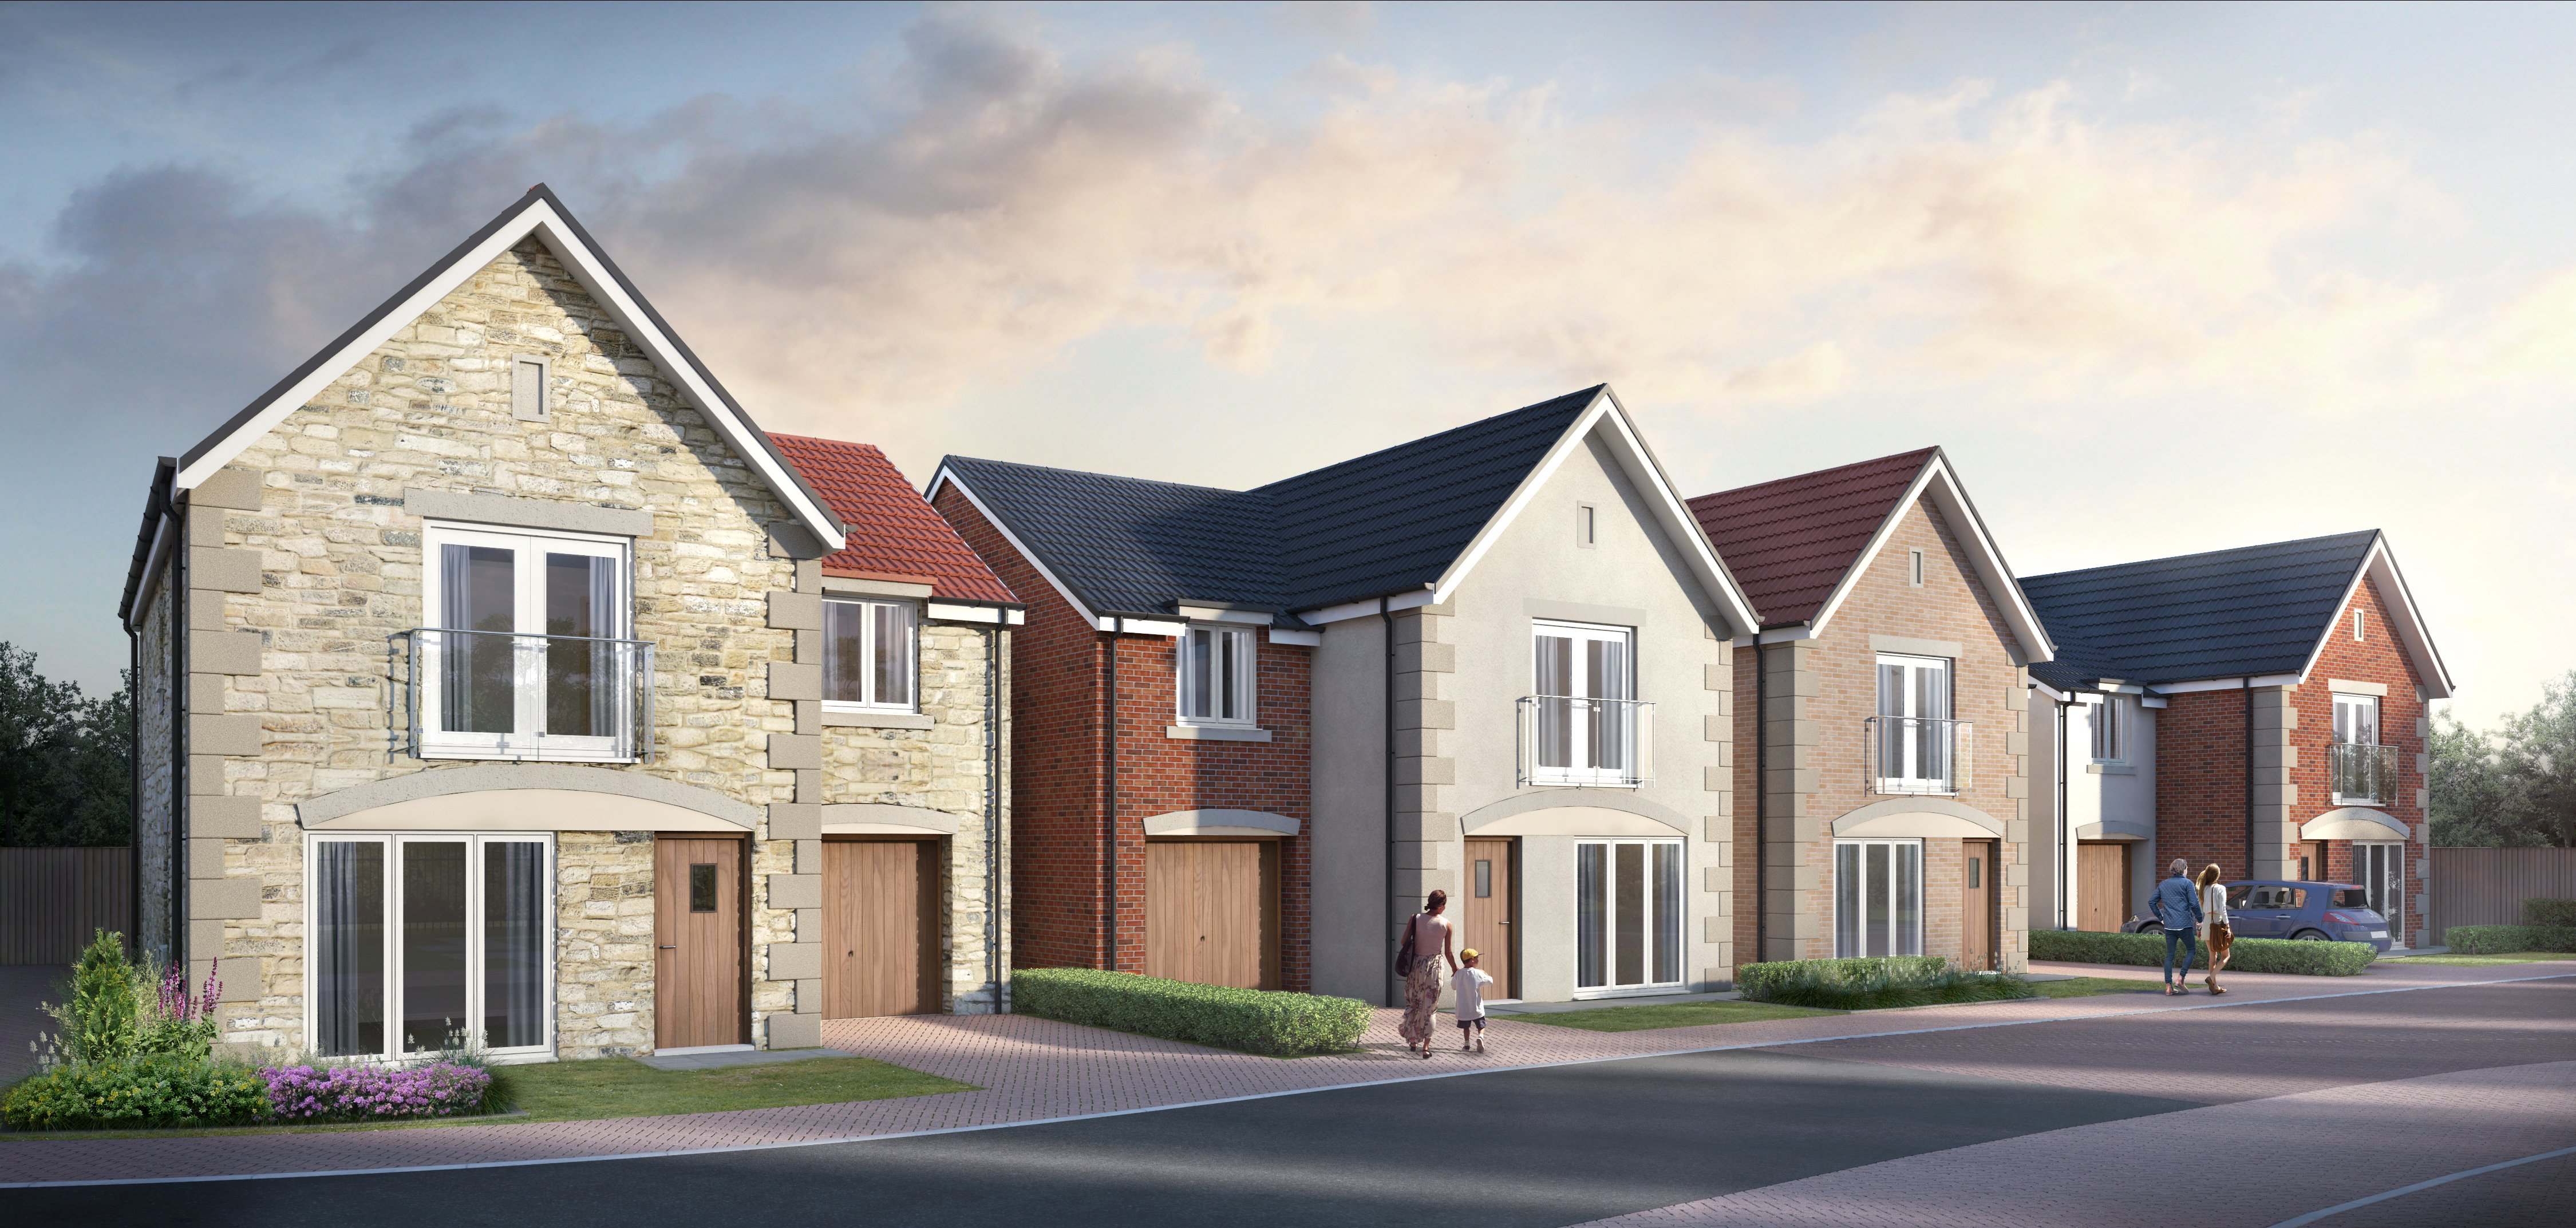 Cathedral Gates residential development in Chilton, County Durham